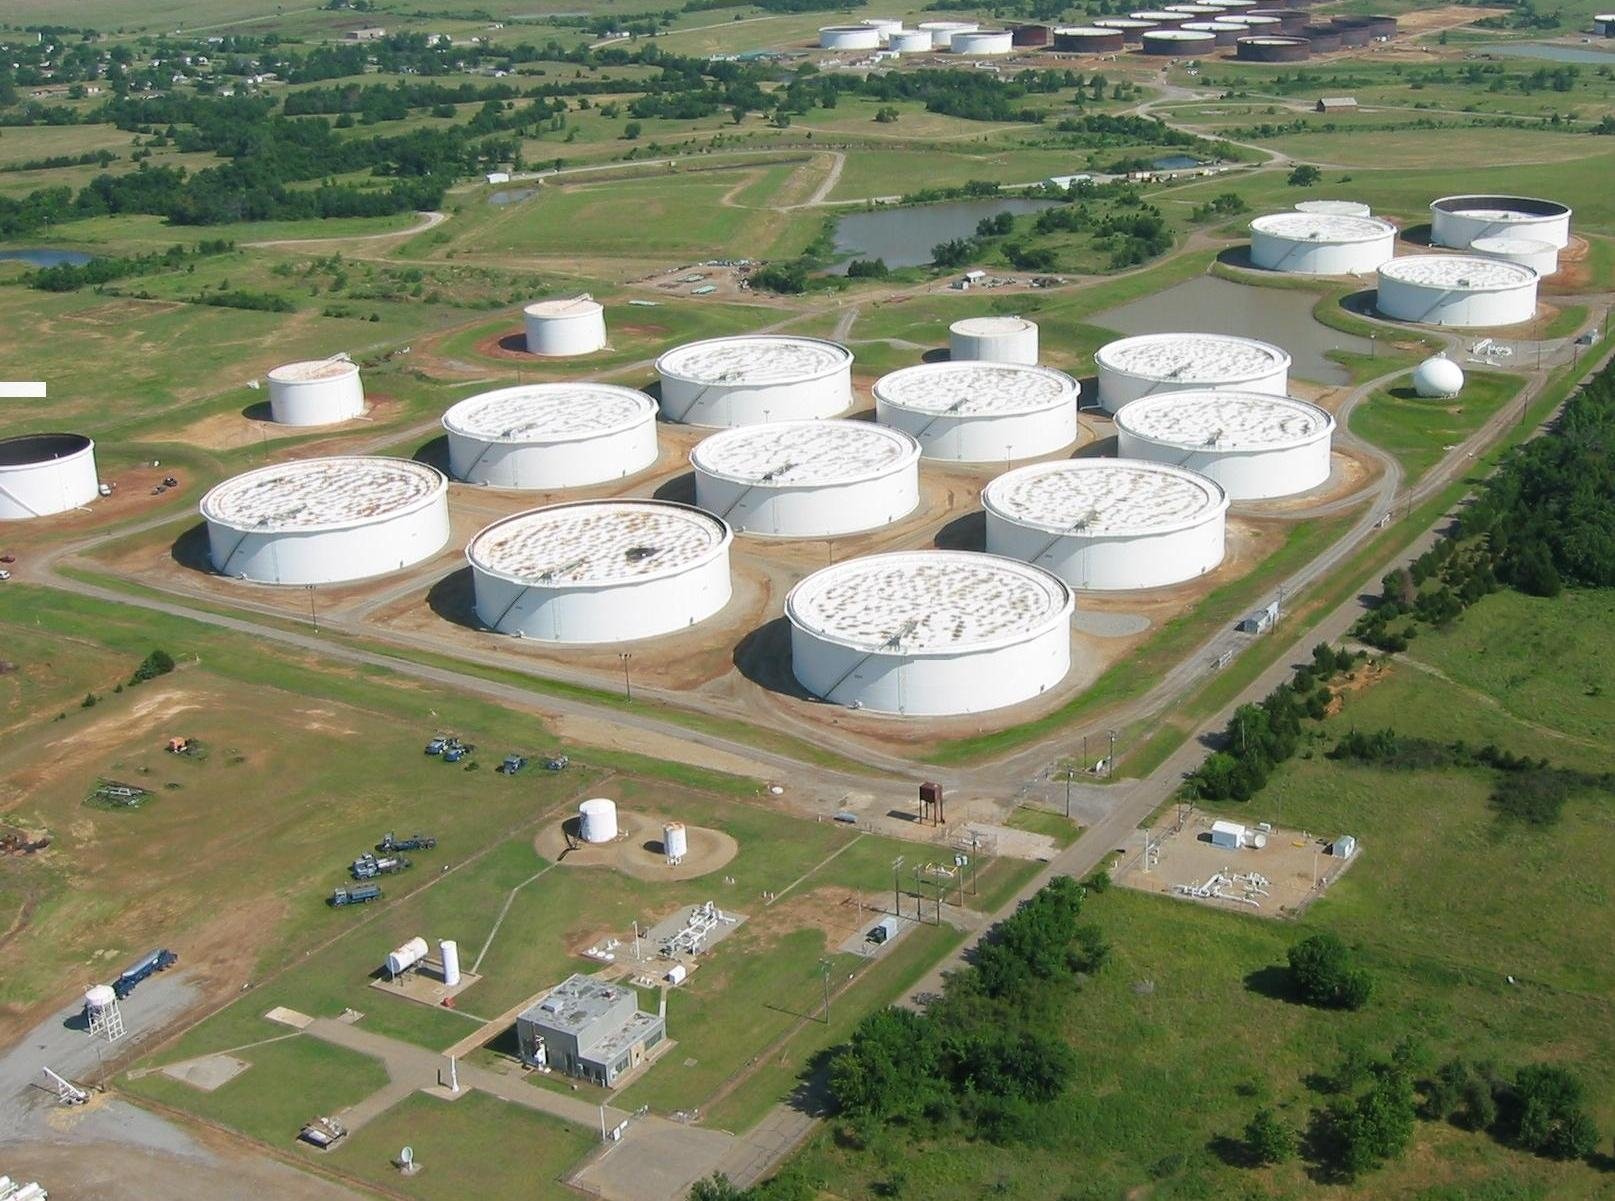 The Cushing Terminal And U.S Oil Storage Woes